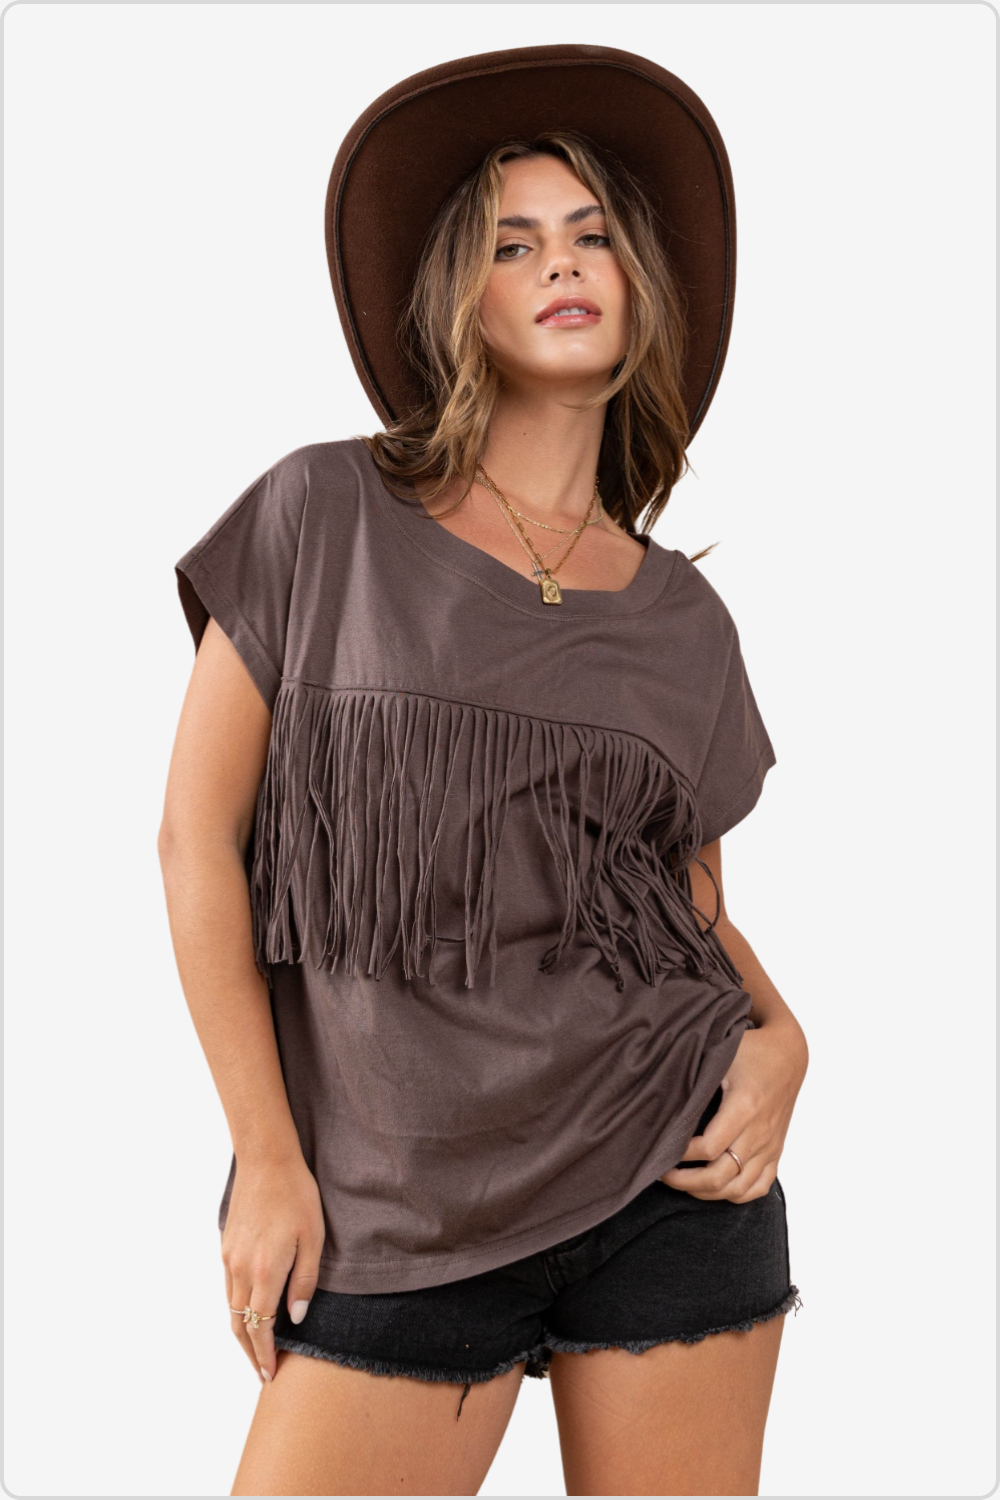 Chic fringe detail round neck short sleeve top, perfect for any look, front view